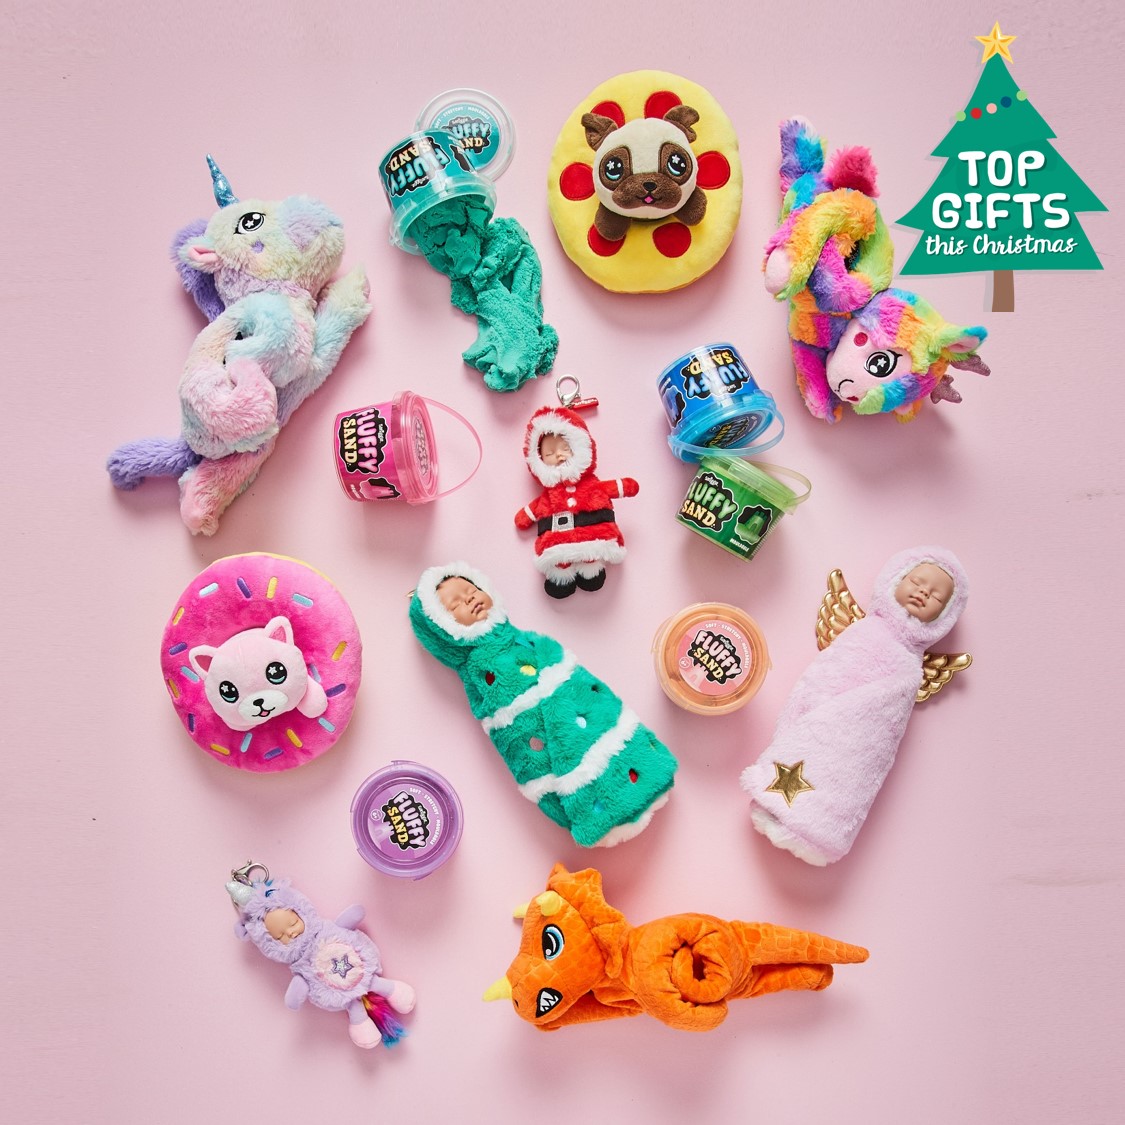 The fluffiest gifting this Christmas! 🎄 Shop our best selling Sleeping Sprouts 🌱 in the brand new Merry collection or our slapband hug-a-buds perfect for Christmas! 🤶